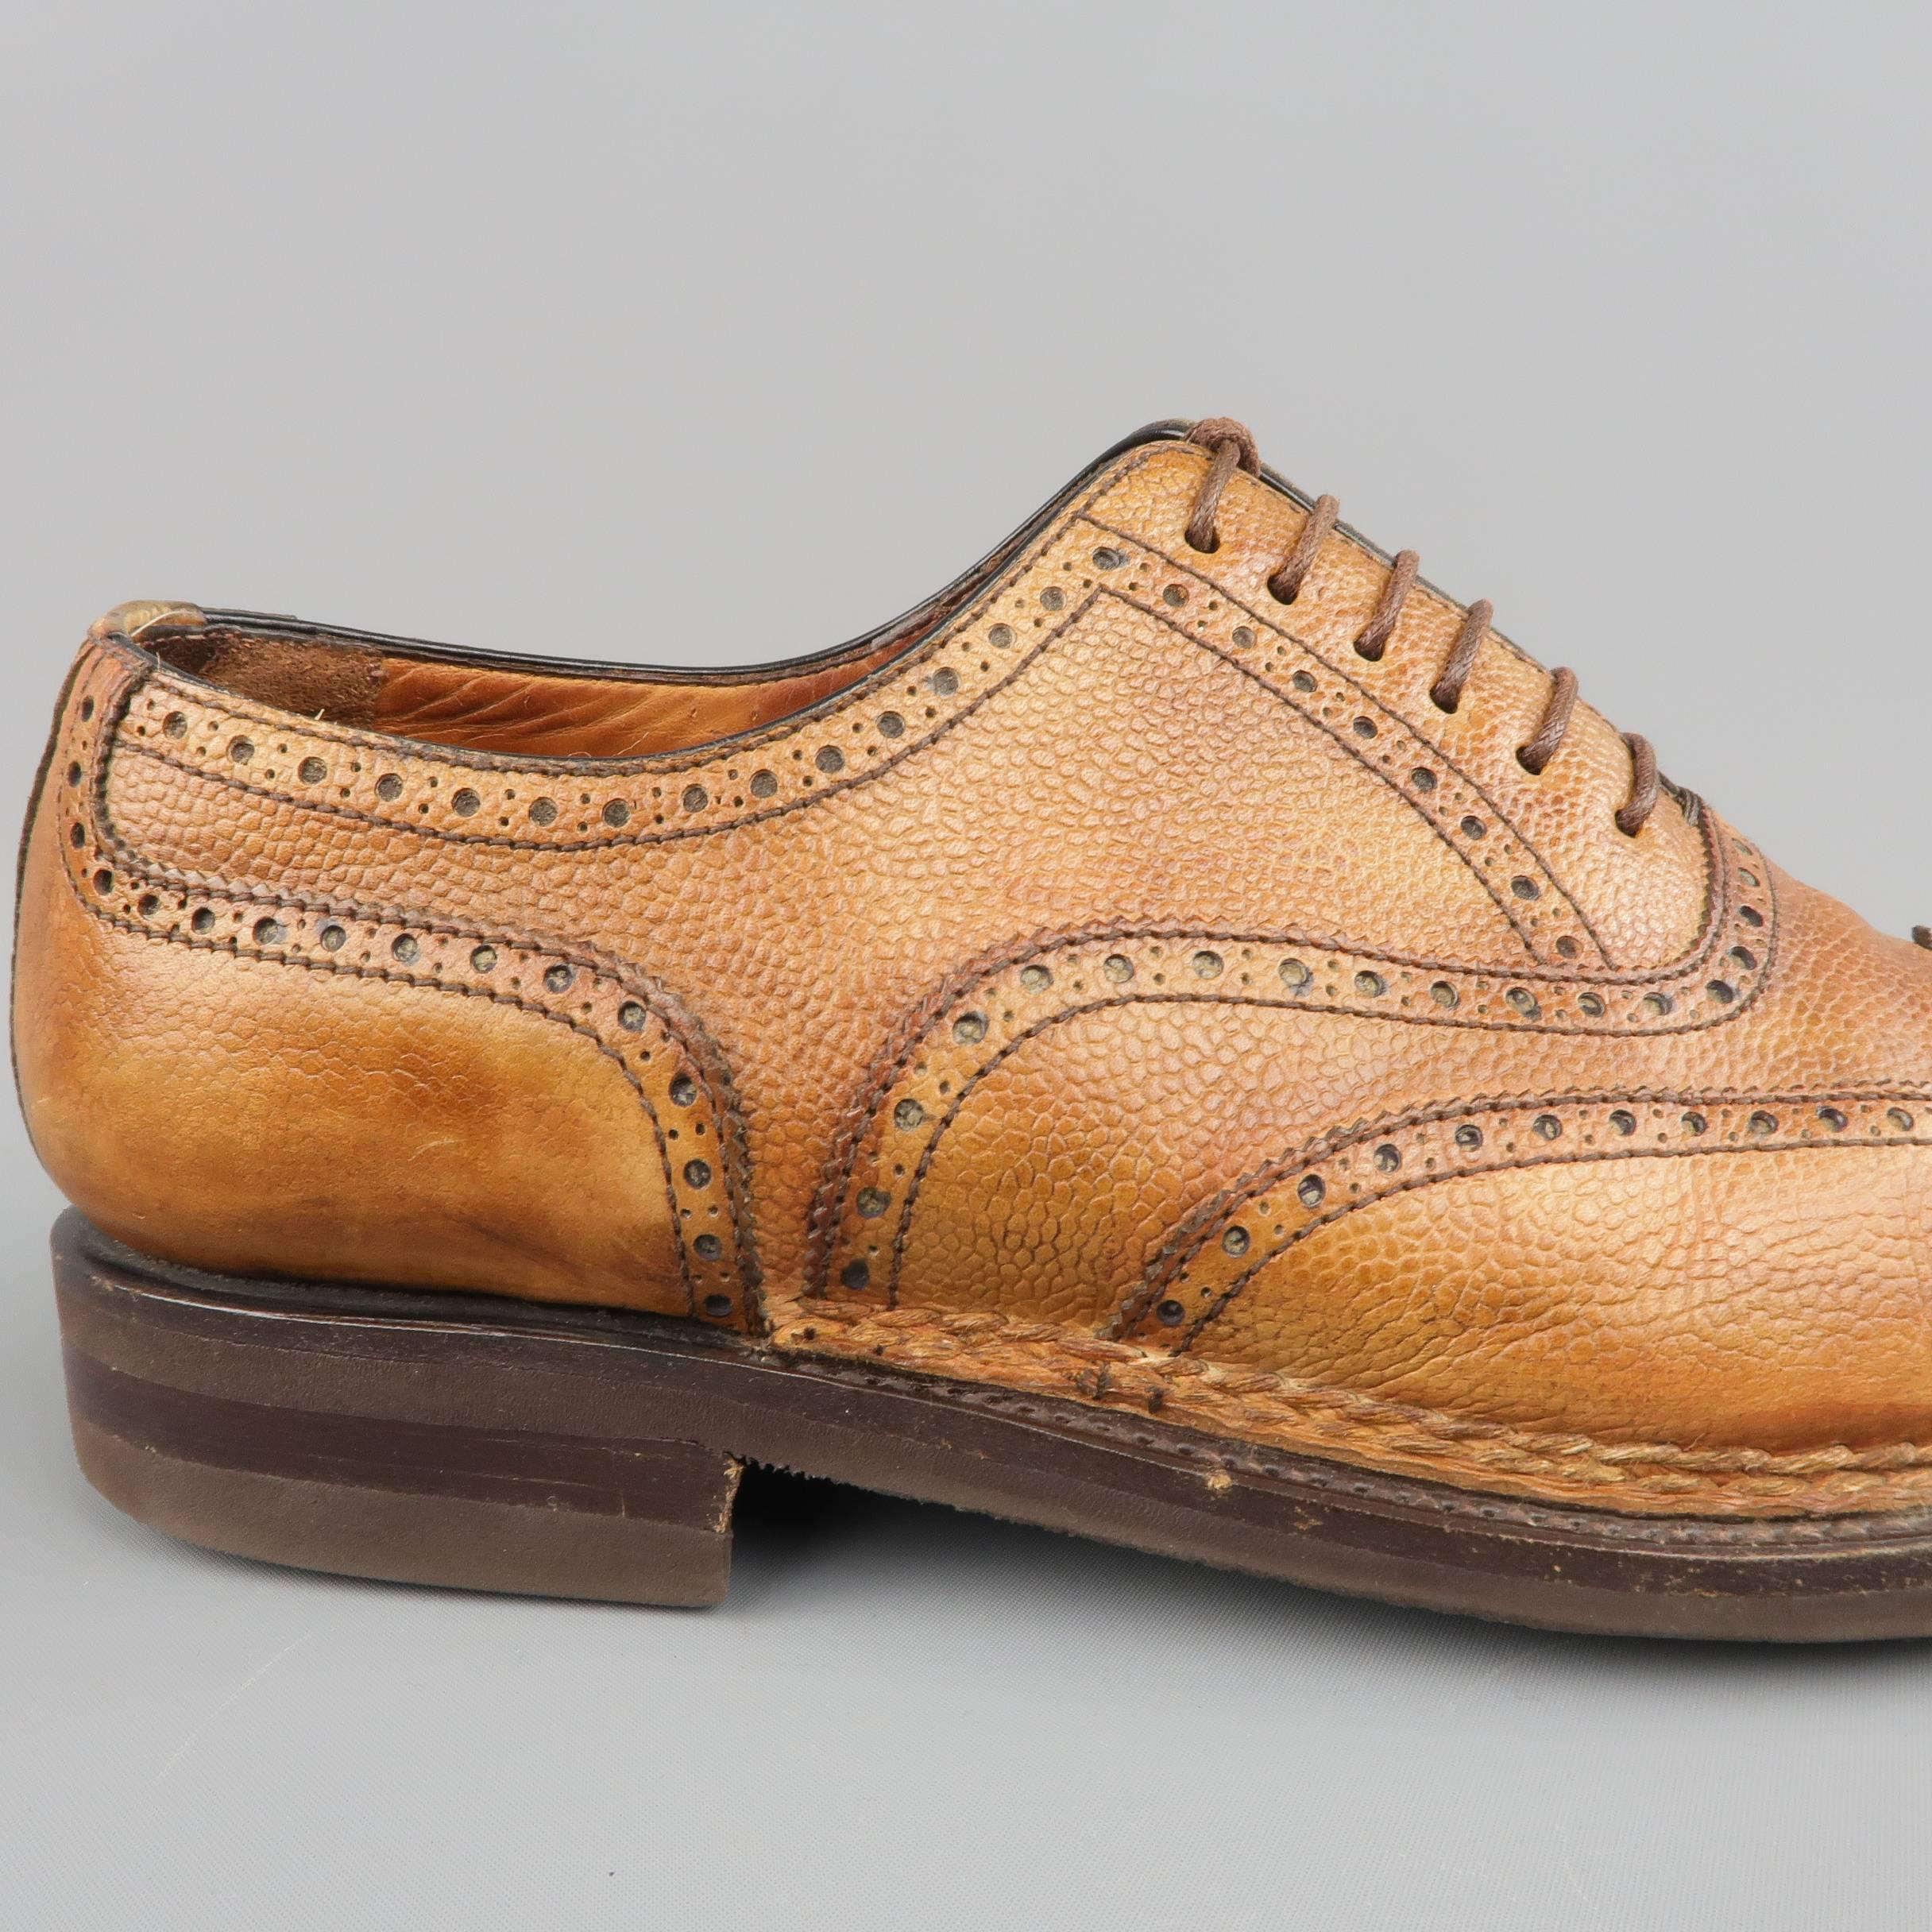 BONTONI dress shoes come in a dyed tan textured leather and feature a pointed wingtip toe, perforated brogue details throughout, leather mid, and rubber Vibram sole. Wear throughout leather. As-Is. Made in Italy.
 
Fair Pre-Owned Condition.
Marked: